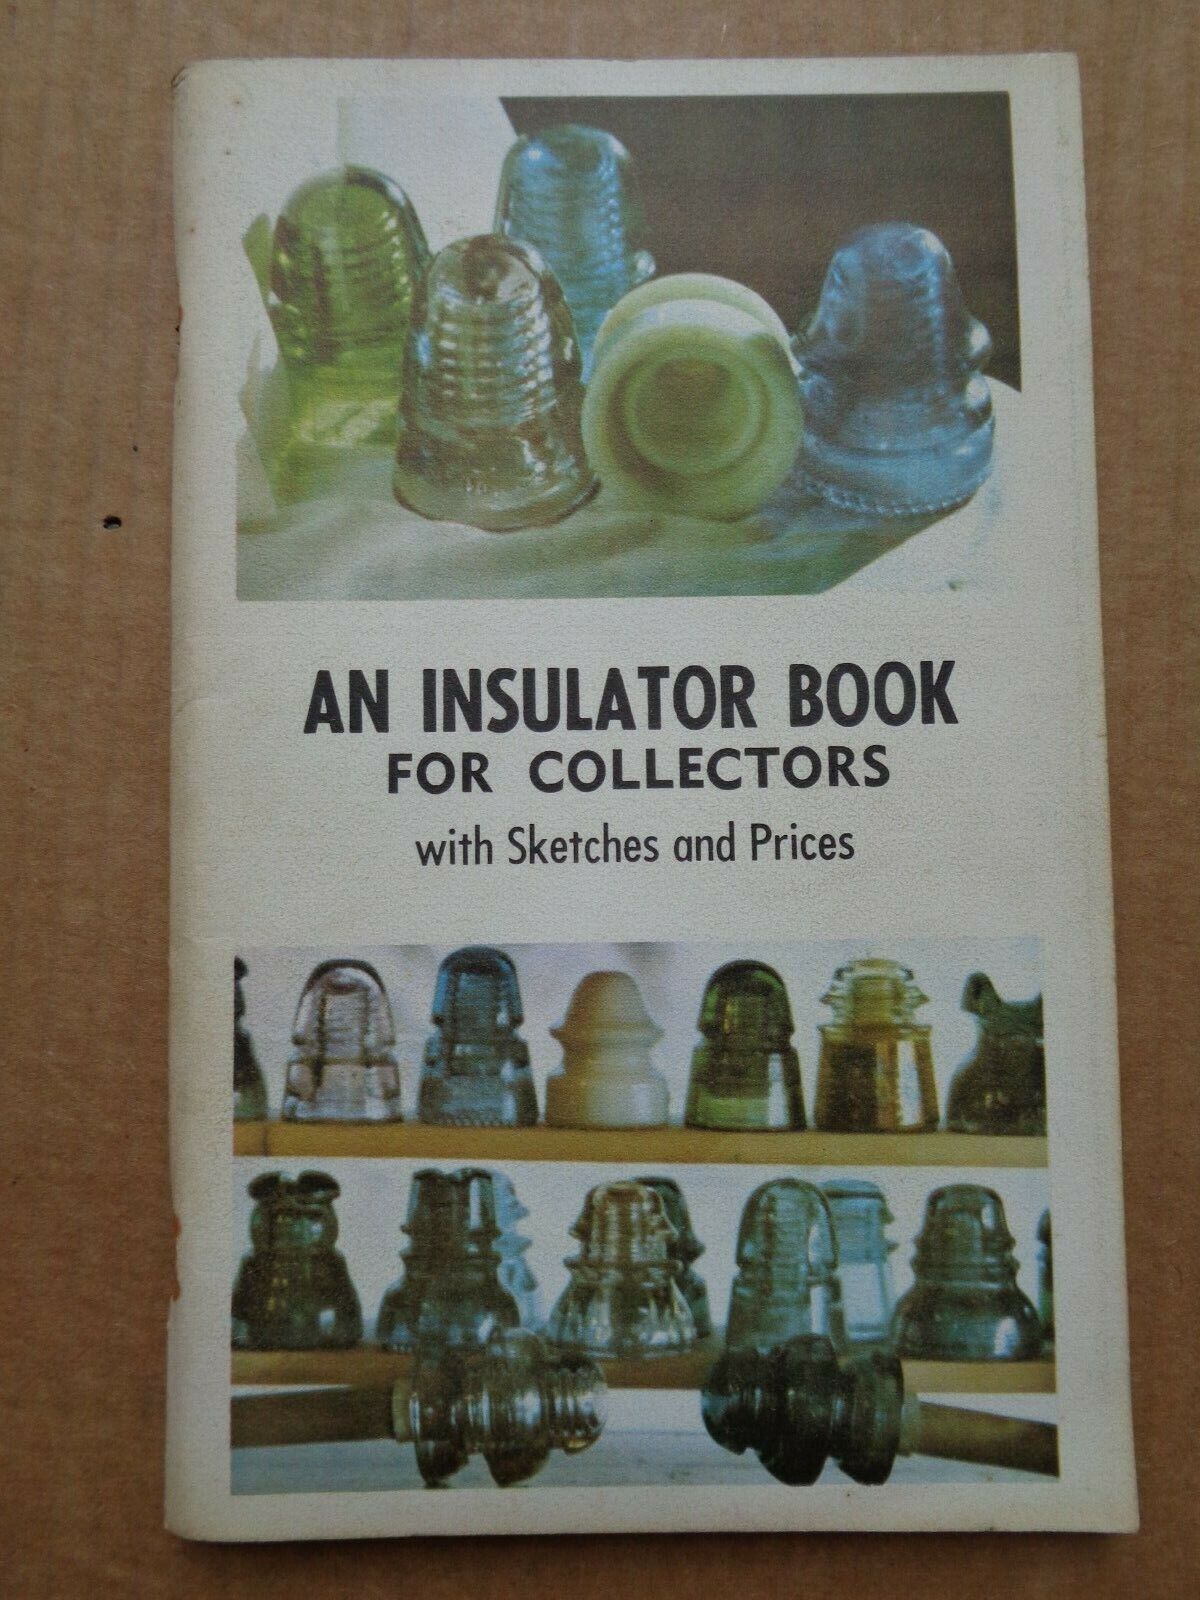 1968 An Insulator Book For Collectors By James L. Hill & Edward Pickett